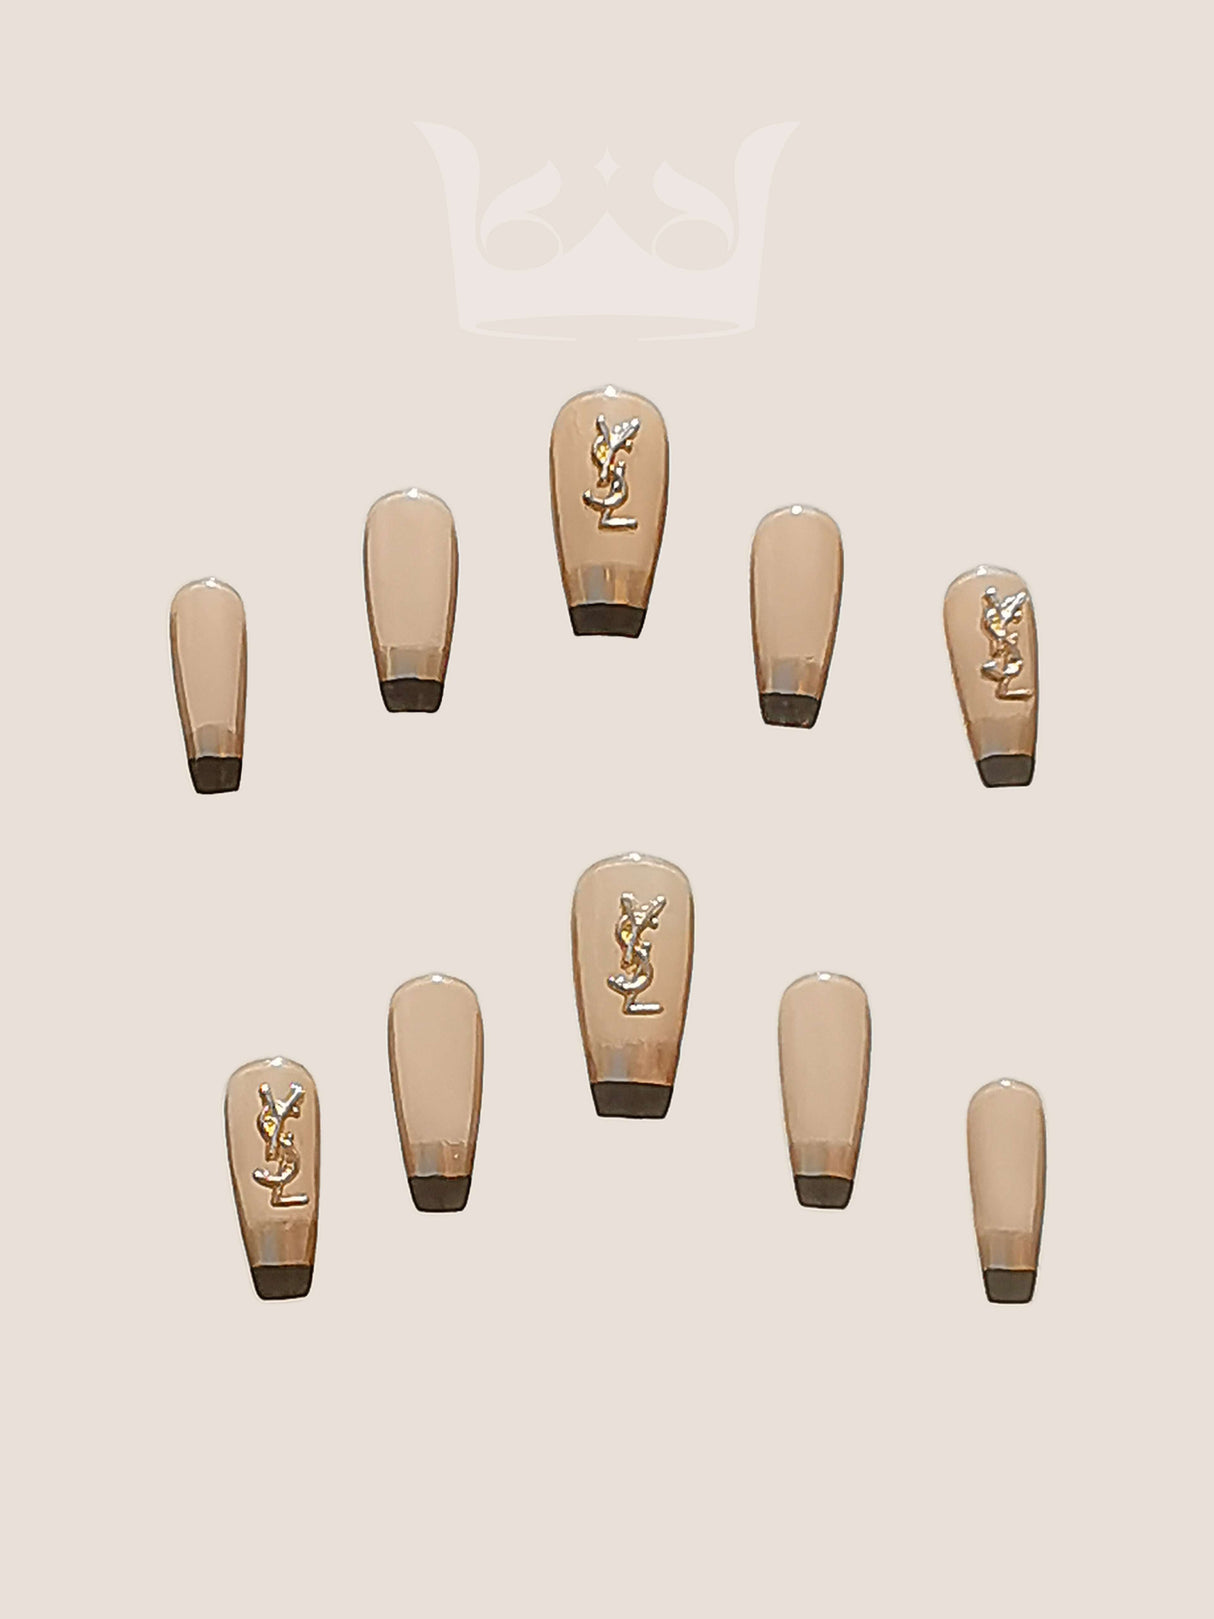 Fashionable and trendy nails with a consistent design theme and gold embellishment, customizable to fit different sizes and shapes, adding sophistication and elegance to the wearer's look.